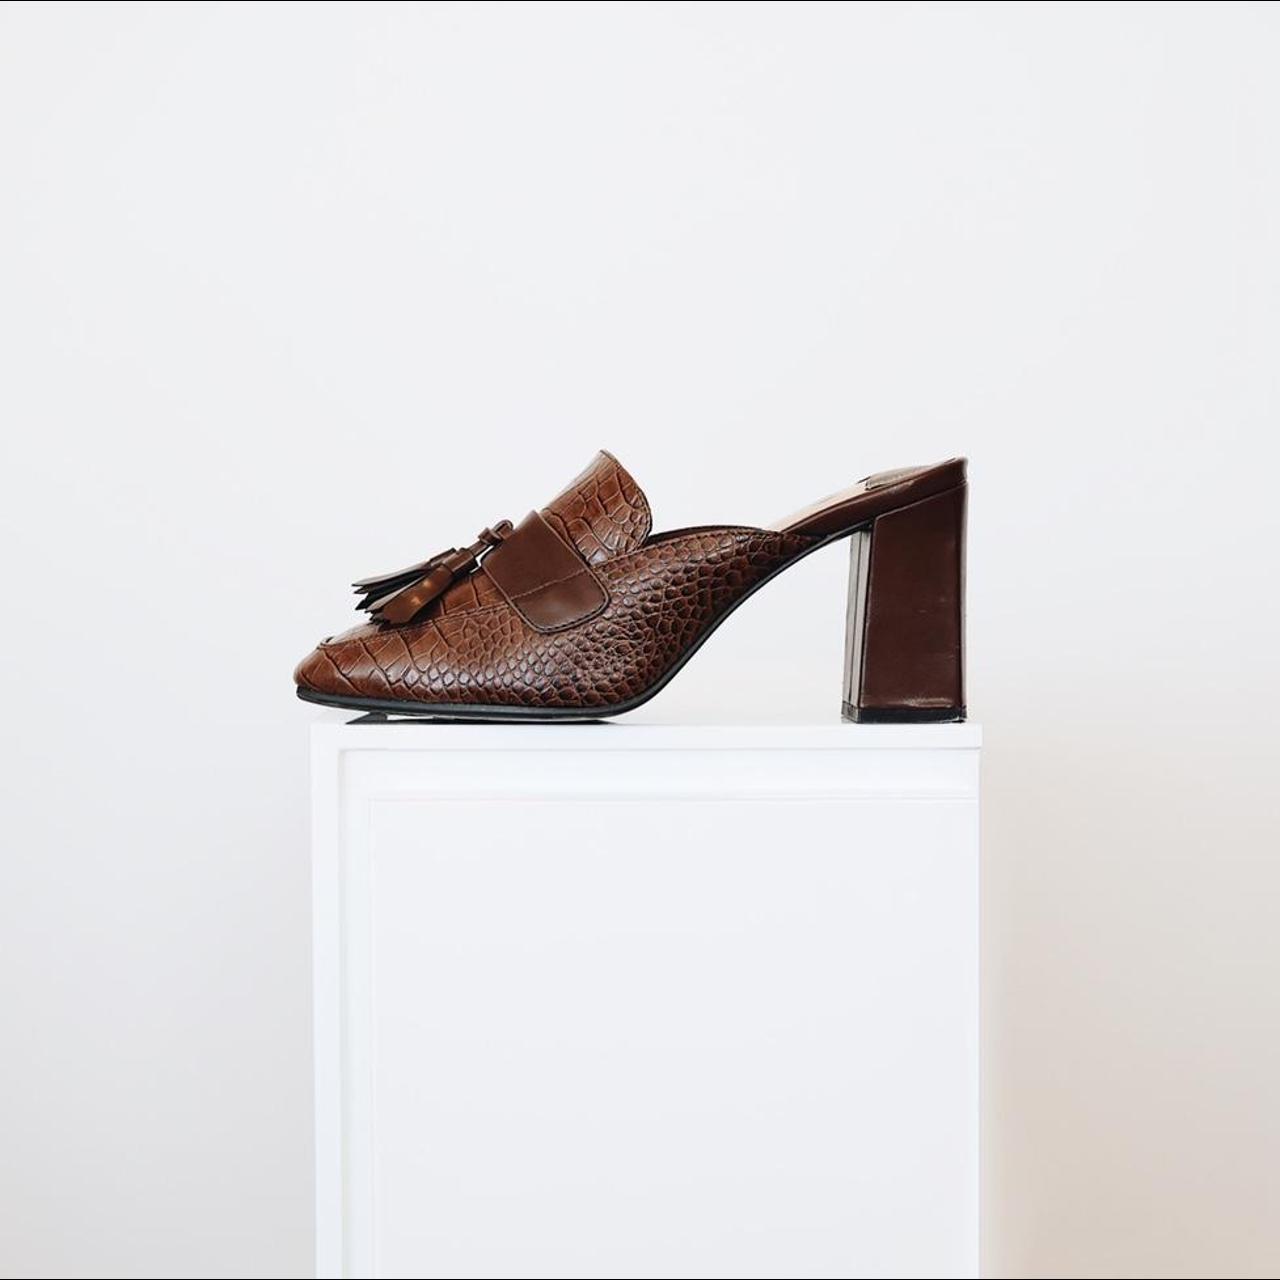 Product Image 2 - Brown Leather Mules

* If you